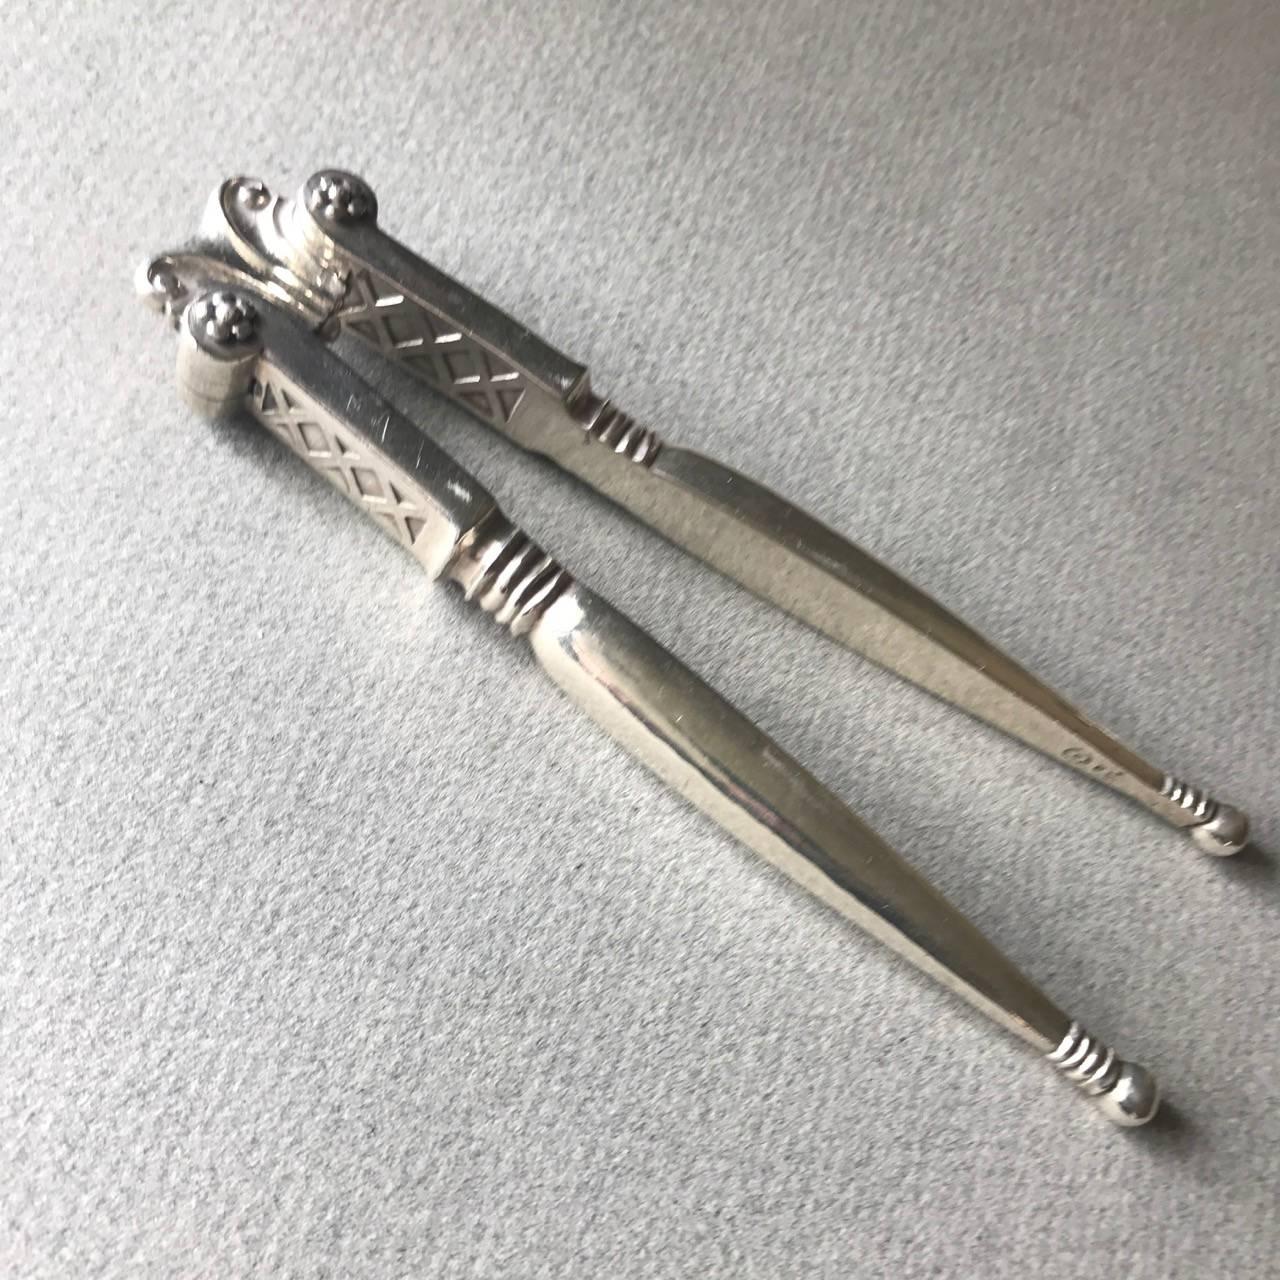 Georg Jensen 830 silver nut crackers no. 134
Can also be used as a Lobster Cracker.

Hand-forged from solid 830 silver. Extremely heavy. Exceptional details. Designed by Johan Rohde,

circa 1919-1927

About the designer:
Johan Rohde